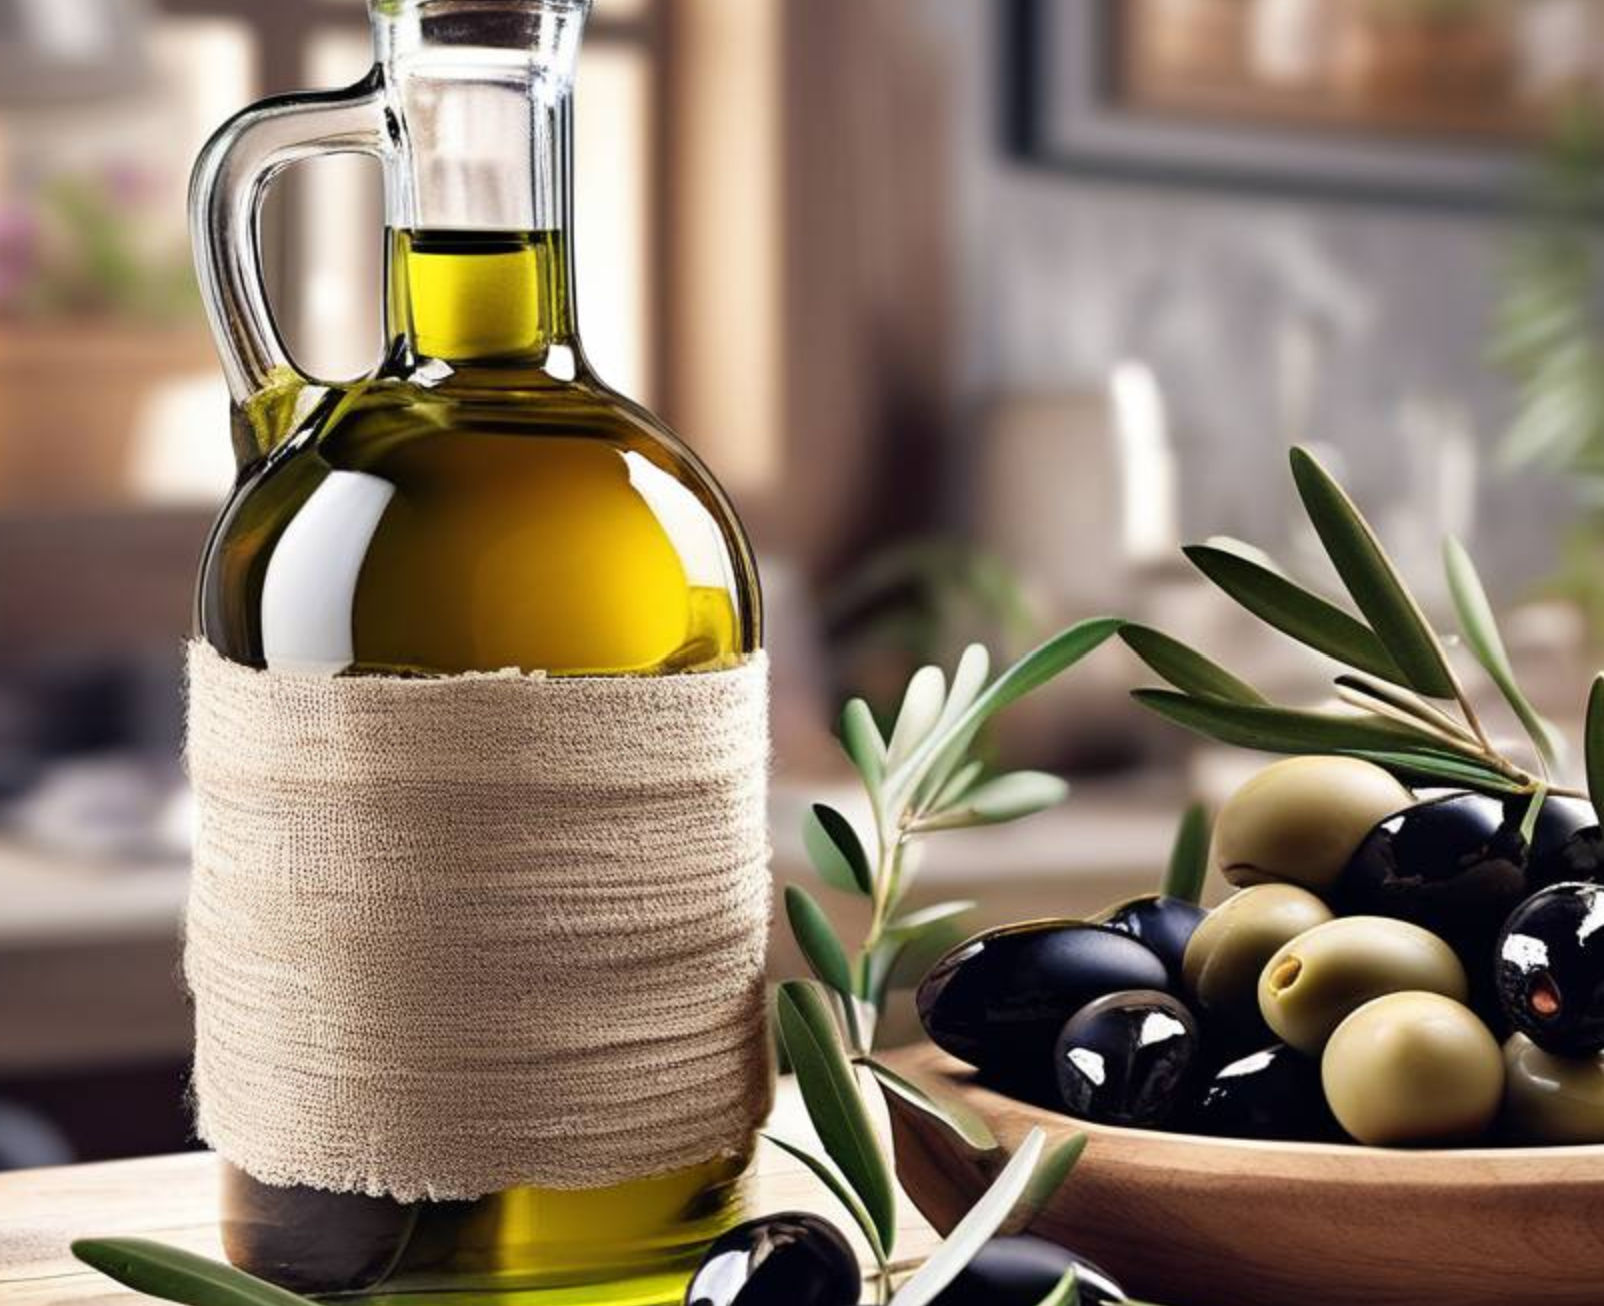 Daily consumption of olive oil may reduce the risk of dementia